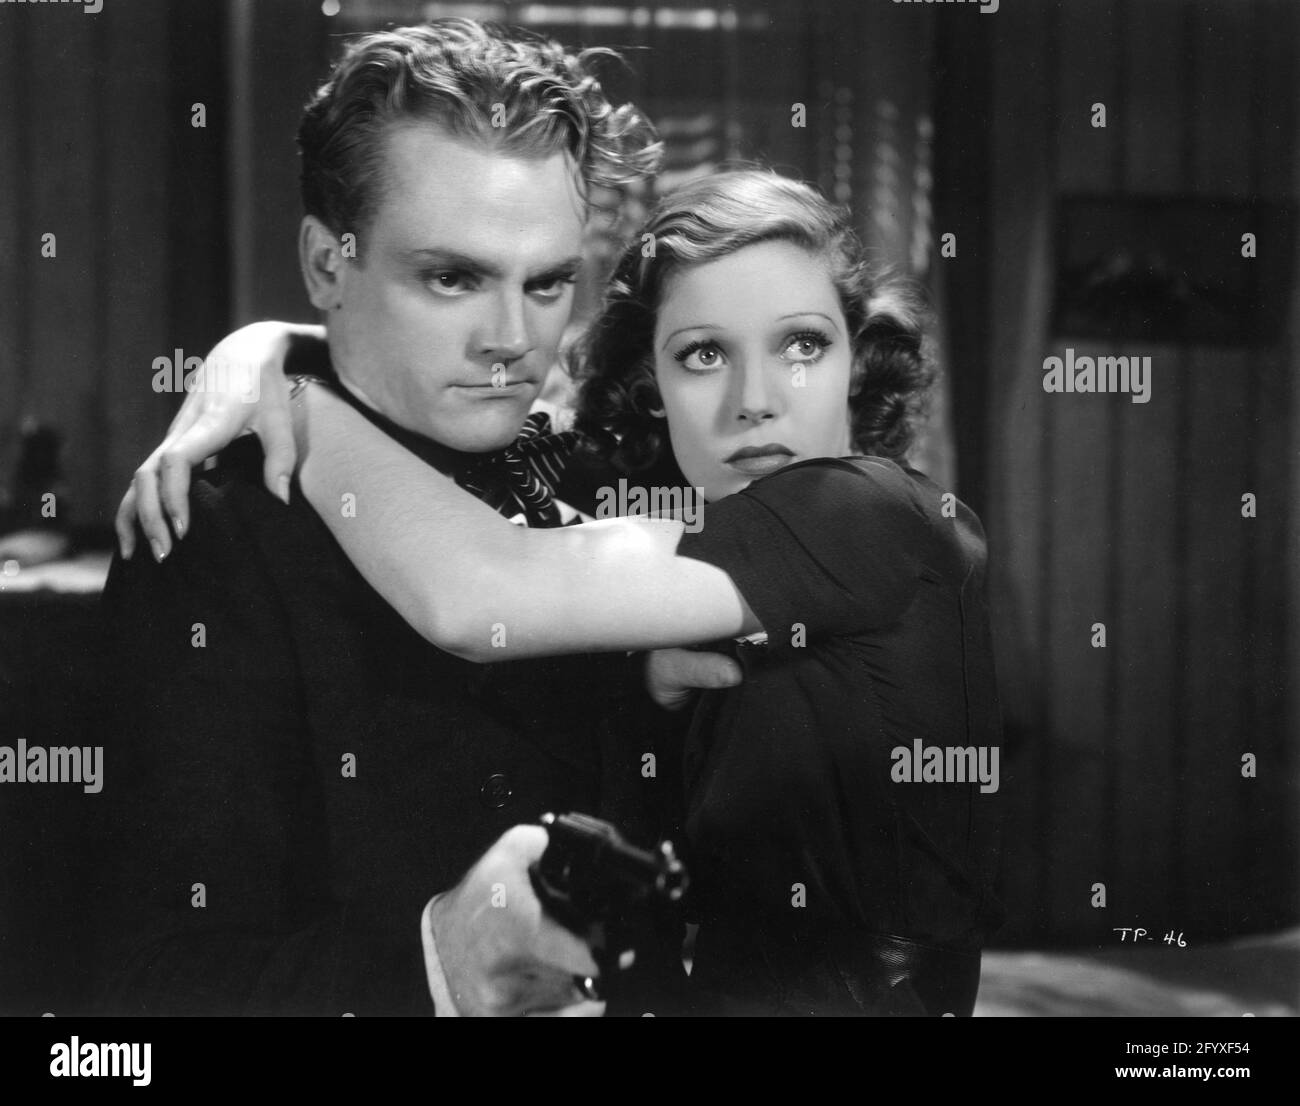 JAMES CAGNEY and LORETTA YOUNG in TAXI 1931 director ROY DEL RUTH based on the play by Kenyon Nicholson adaptation and dialogue Kubec Glasmon and John Bright A Warner Bros. and Vitaphone Picture Stock Photo